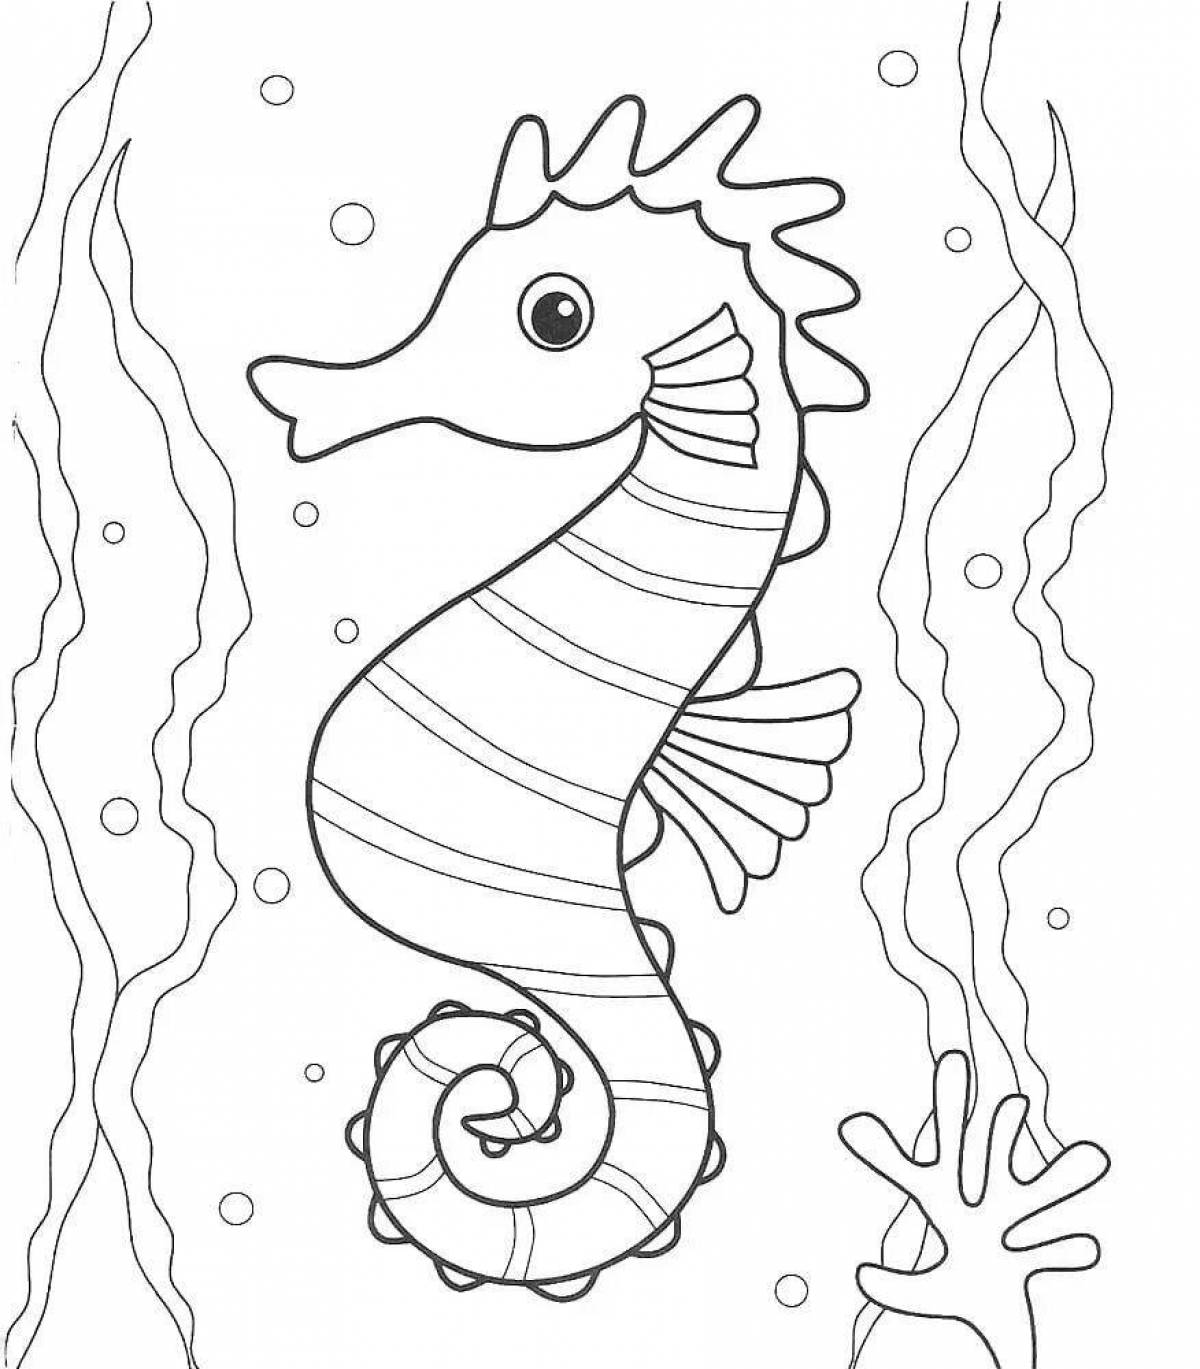 Fabulous underwater life coloring pages